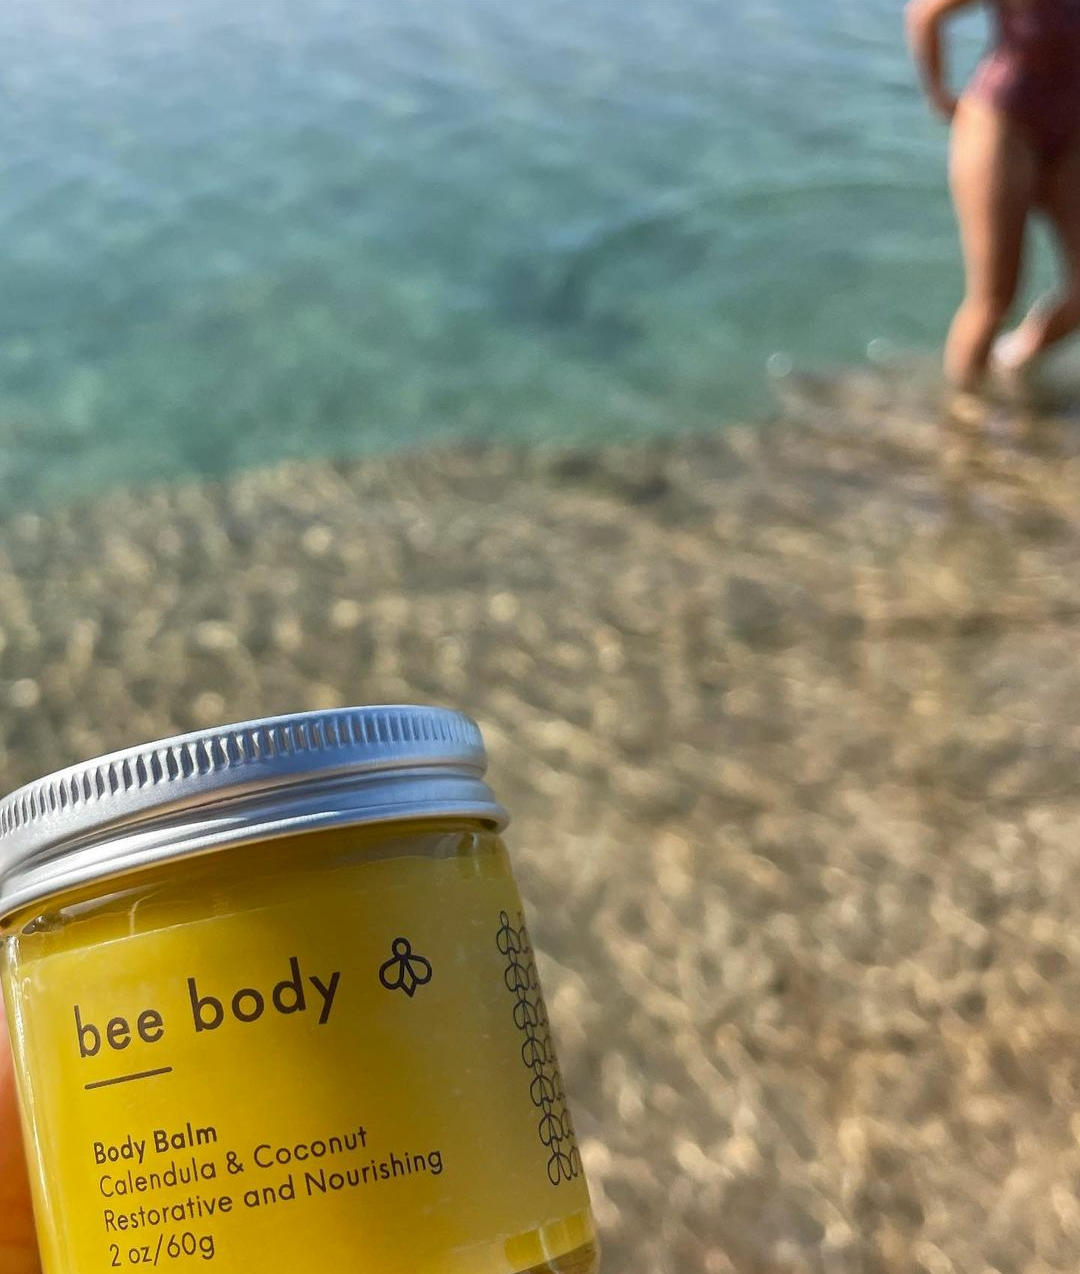 Calendula & Coconut Body Balm: Embrace nature’s soothing embrace as the balm is held amidst a serene beach setting. With pebbles underfoot and turquoise waters glistening, a tranquil backdrop frames the scene, where a relaxed female figure enjoys the beauty of the beach in her bathing suit.